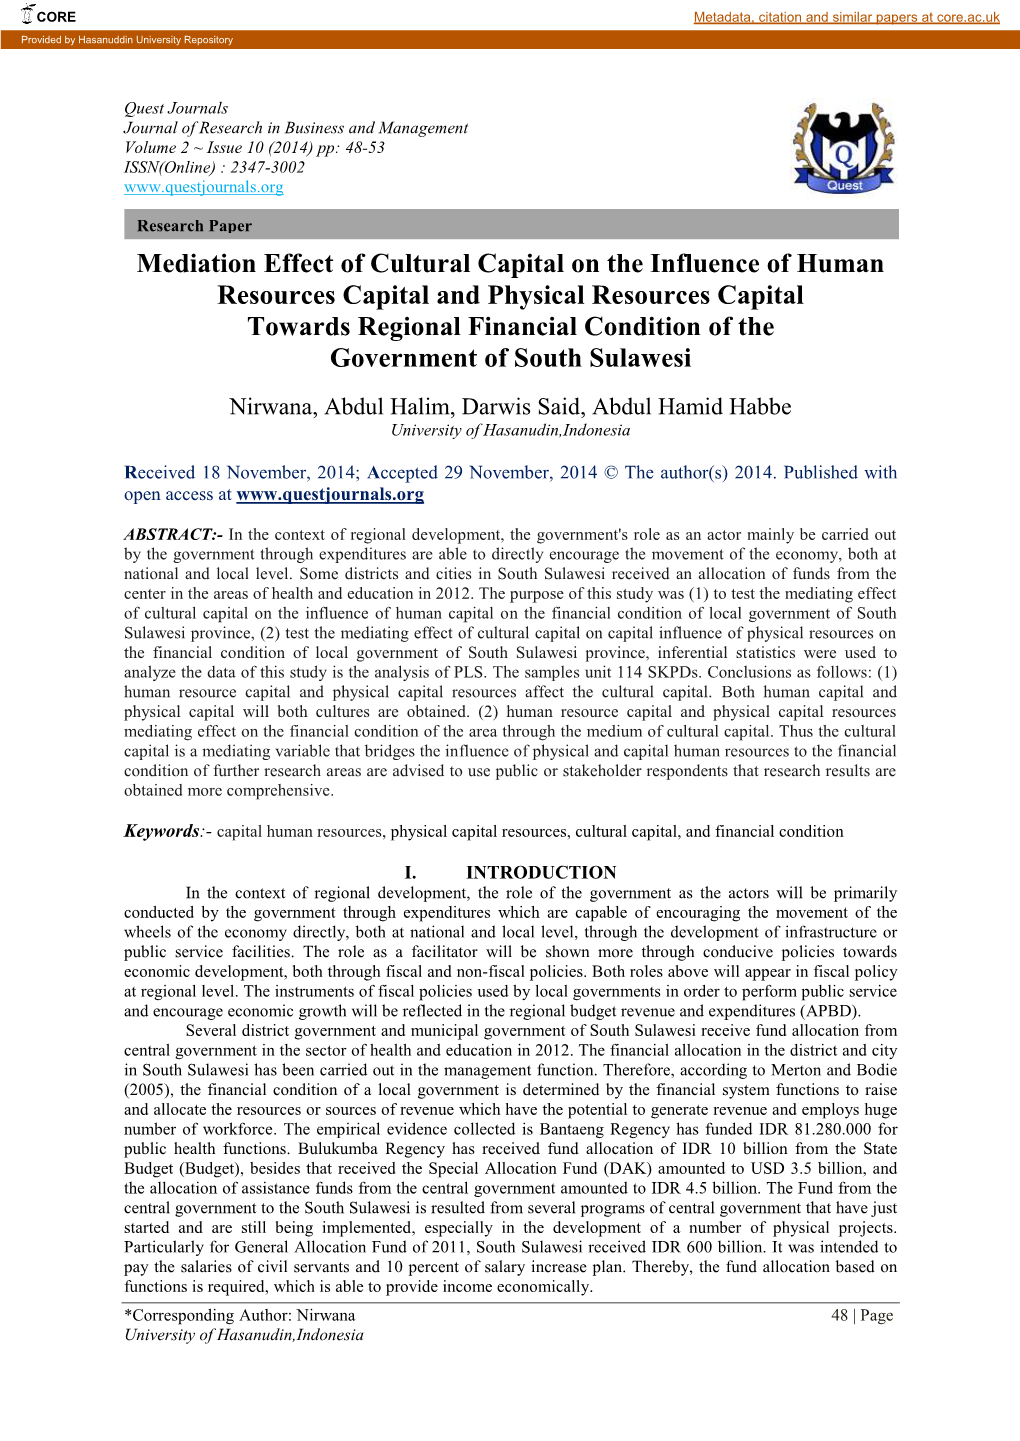 Mediation Effect of Cultural Capital on the Influence of Human Resources